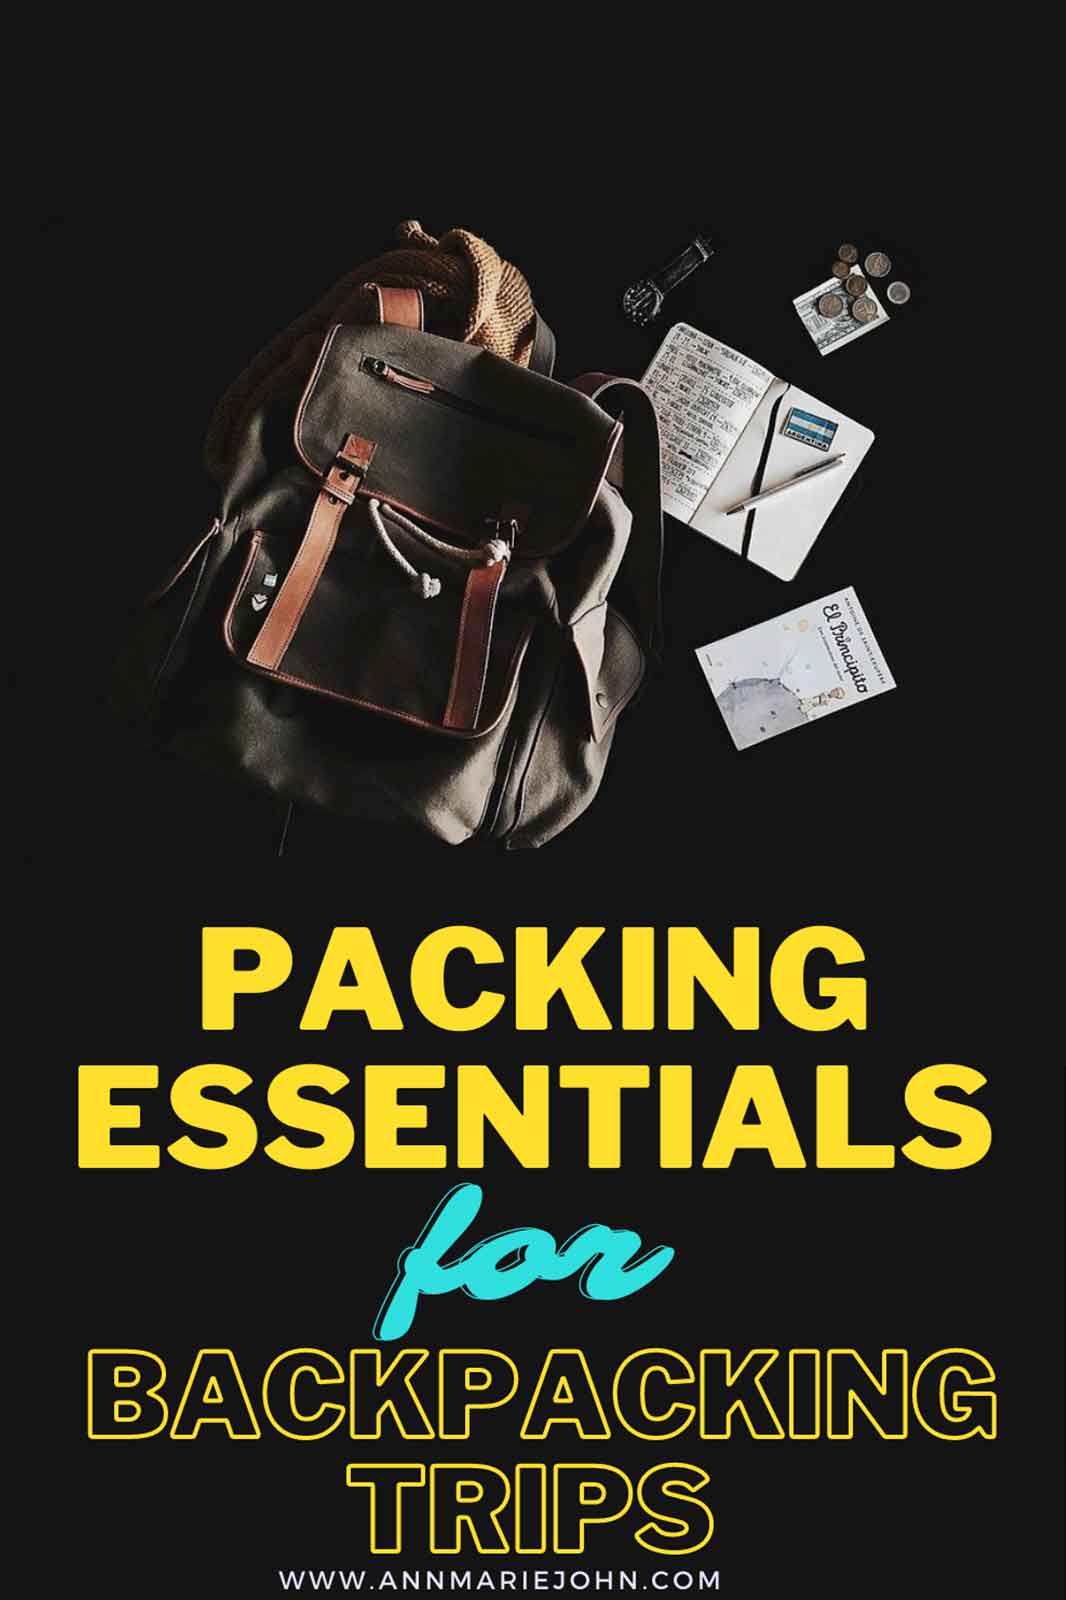 Packing Essentials for Backpacking Trips